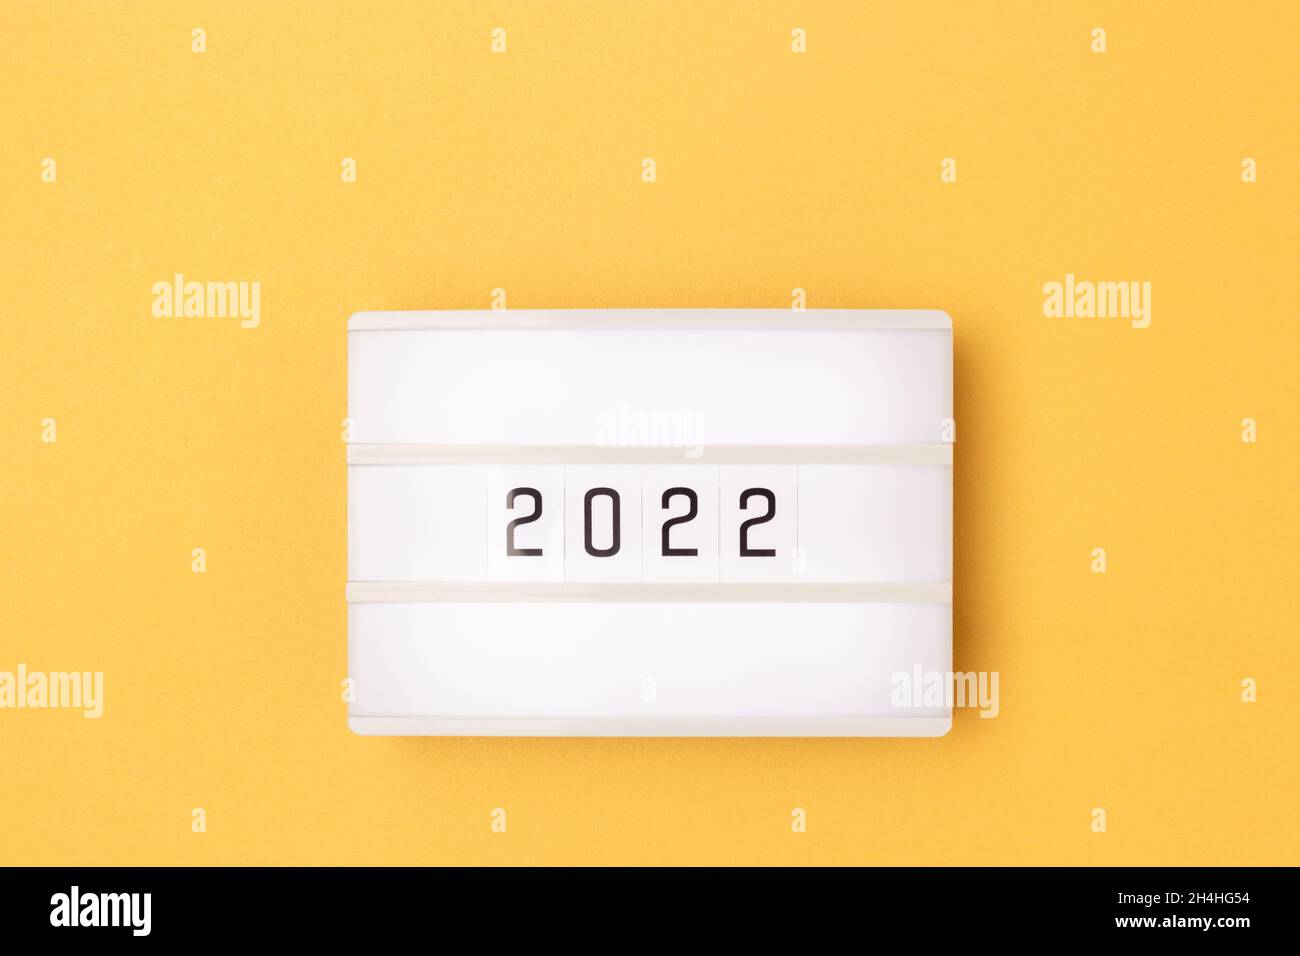 White lightbox with 2022 numbers on a golden background with copy space. Stock Photo